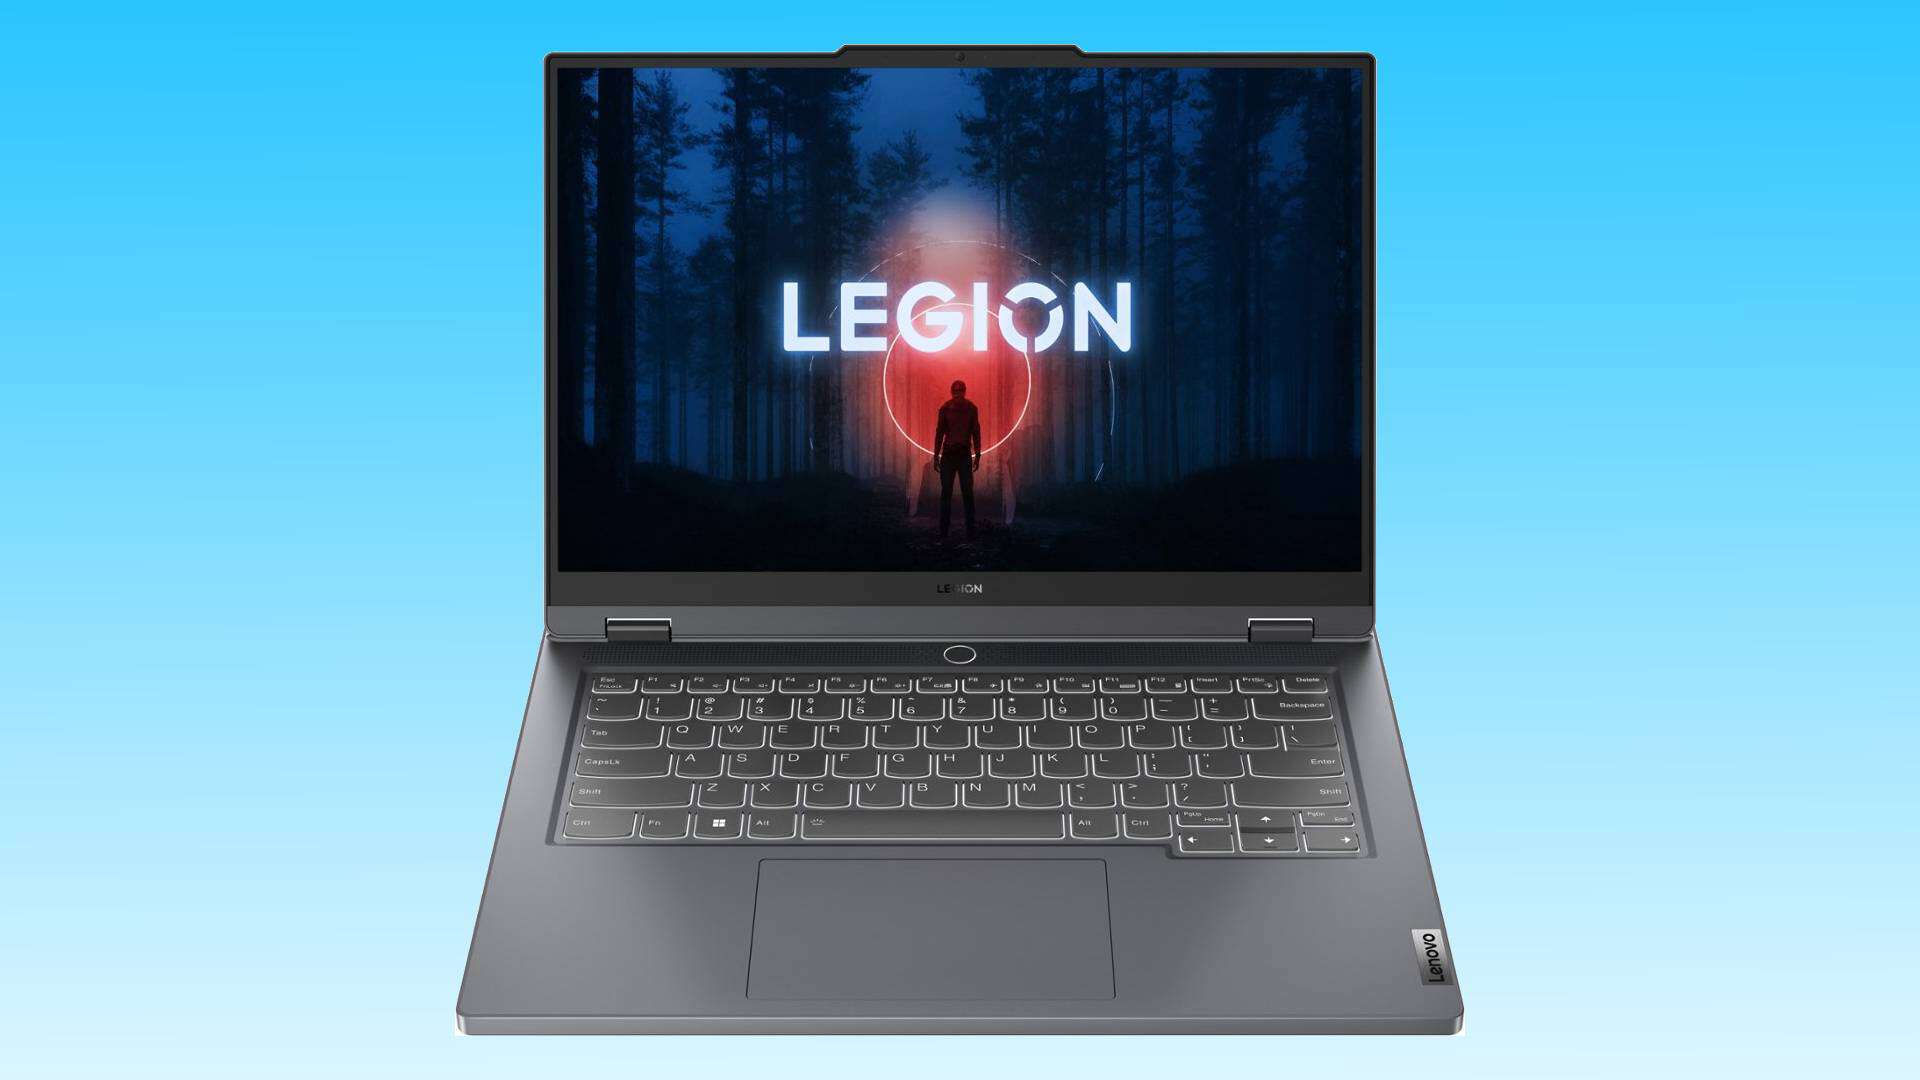 A Lenovo RTX 4060 laptop on a blue gradient background, displaying a mysterious figure standing in a forest with glowing red "legion" text above.